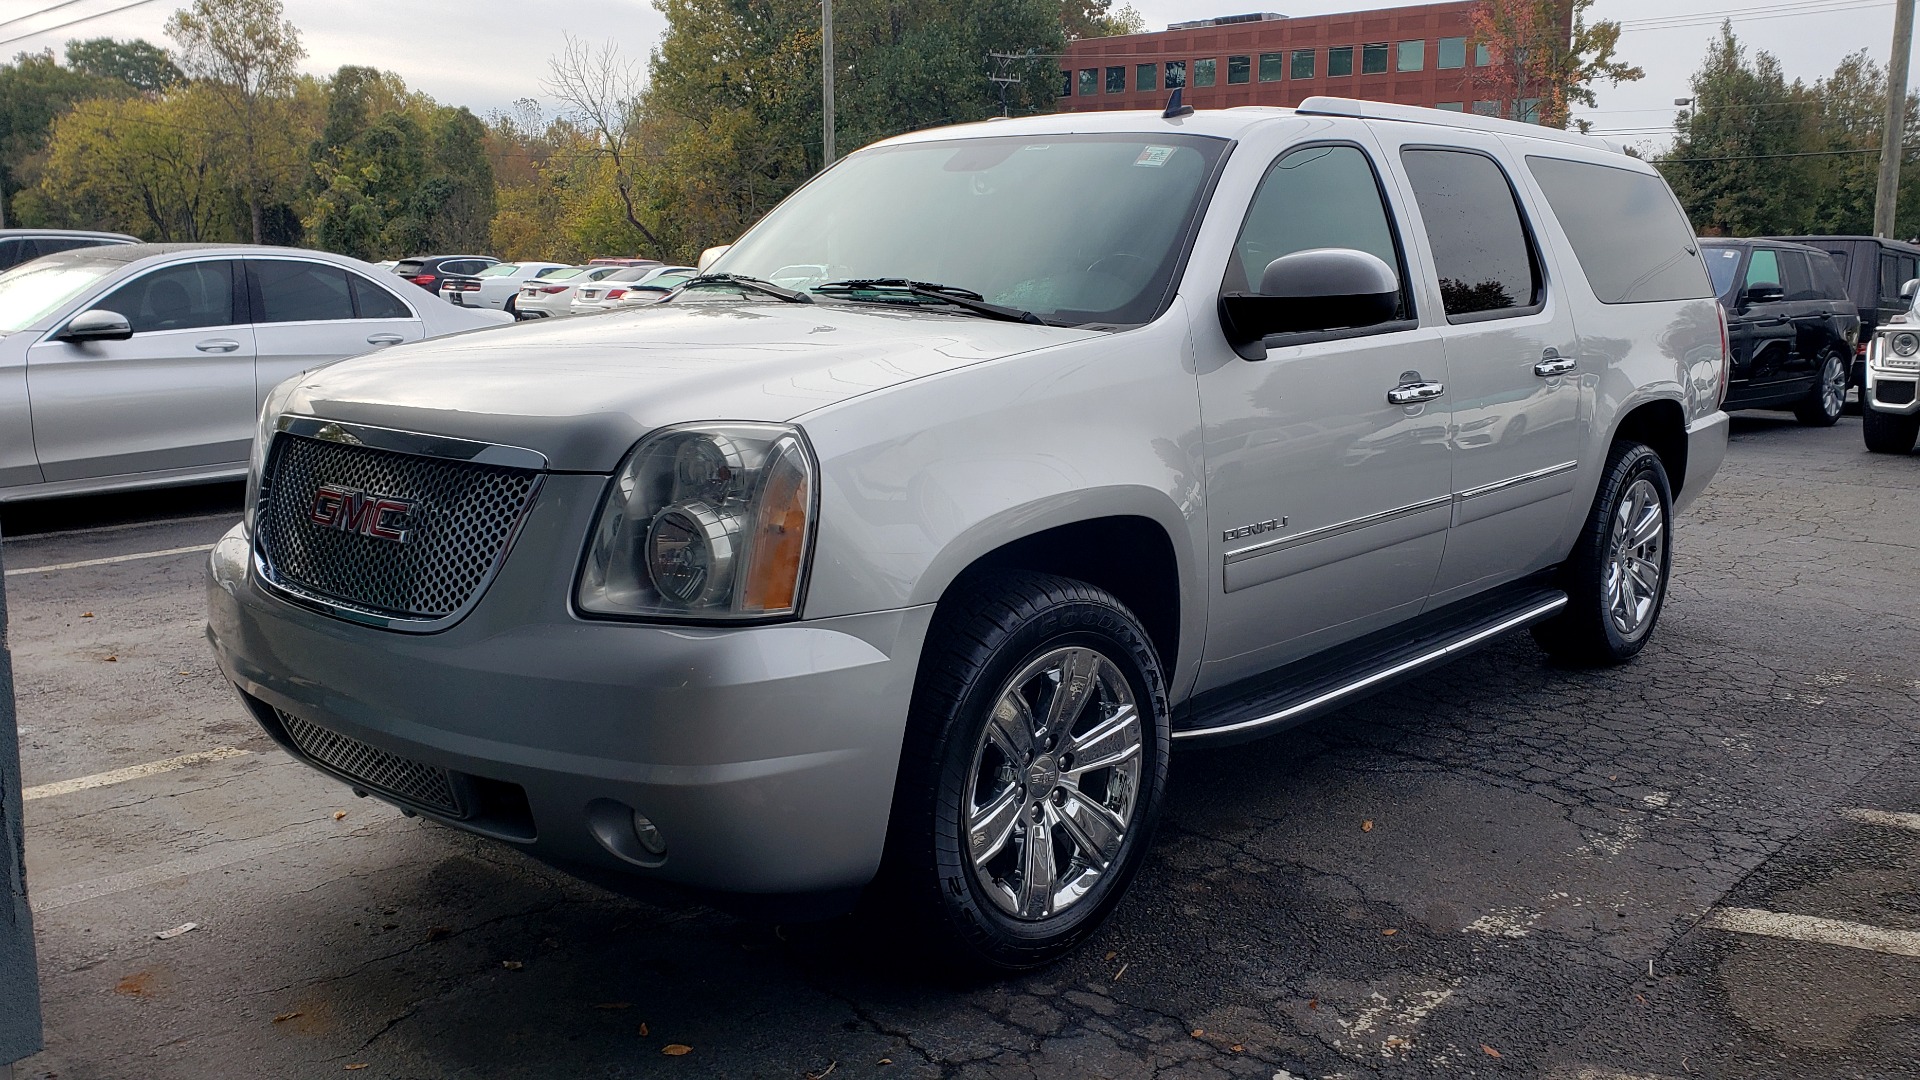 Used 2014 GMC YUKON XL DENALI / 5.3L V8 / AWD / NAV / BOSE / SUNROOF / 3-ROW / REARVIEW for sale Sold at Formula Imports in Charlotte NC 28227 1